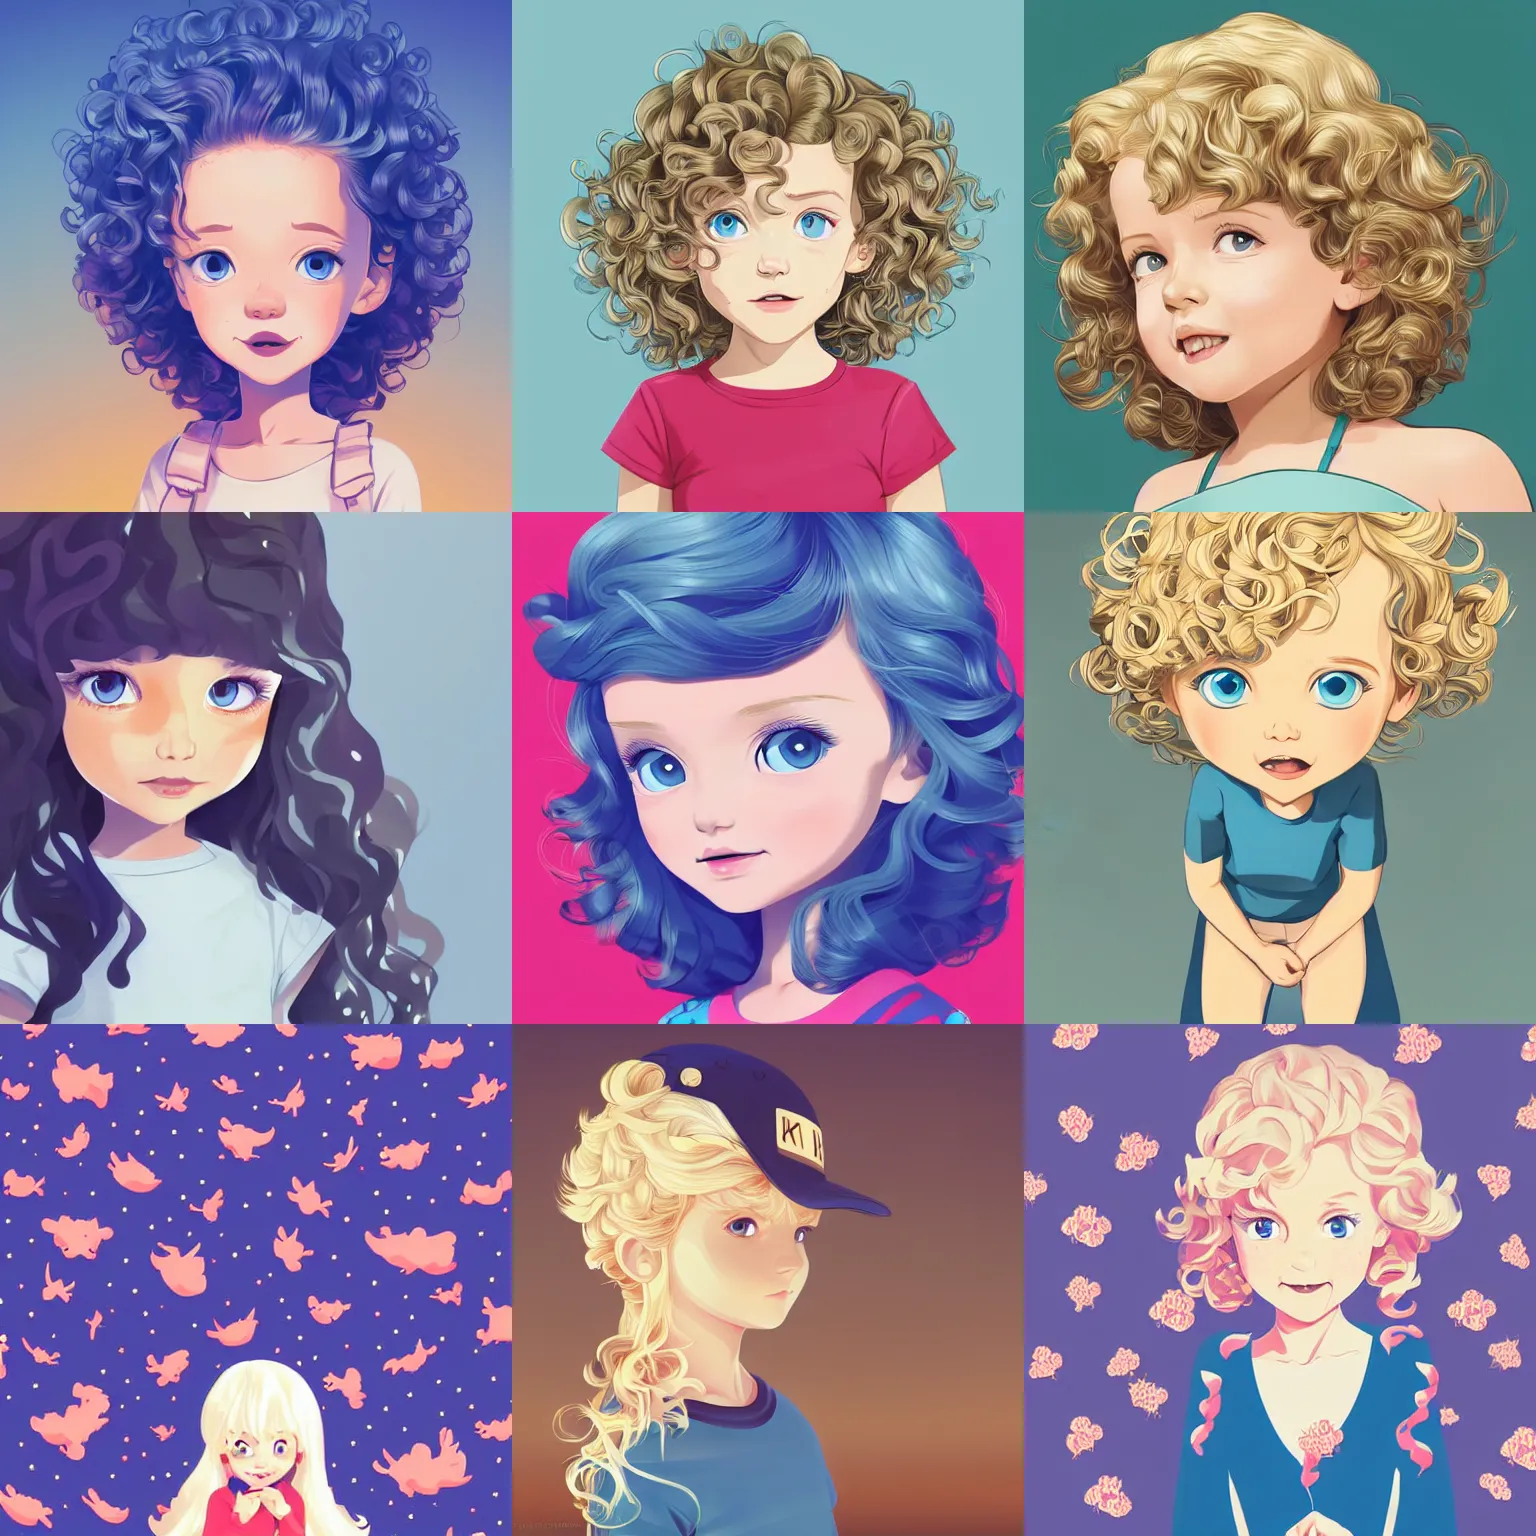 Prompt: 2 years old girl with blue eyes and blonde curly hair, clean cel shaded vector art, shutterstock, behance hd by lois van baarle, artgerm, helen huang, by makoto shinkai and ilya kuvshinov, rossdraws, illustration